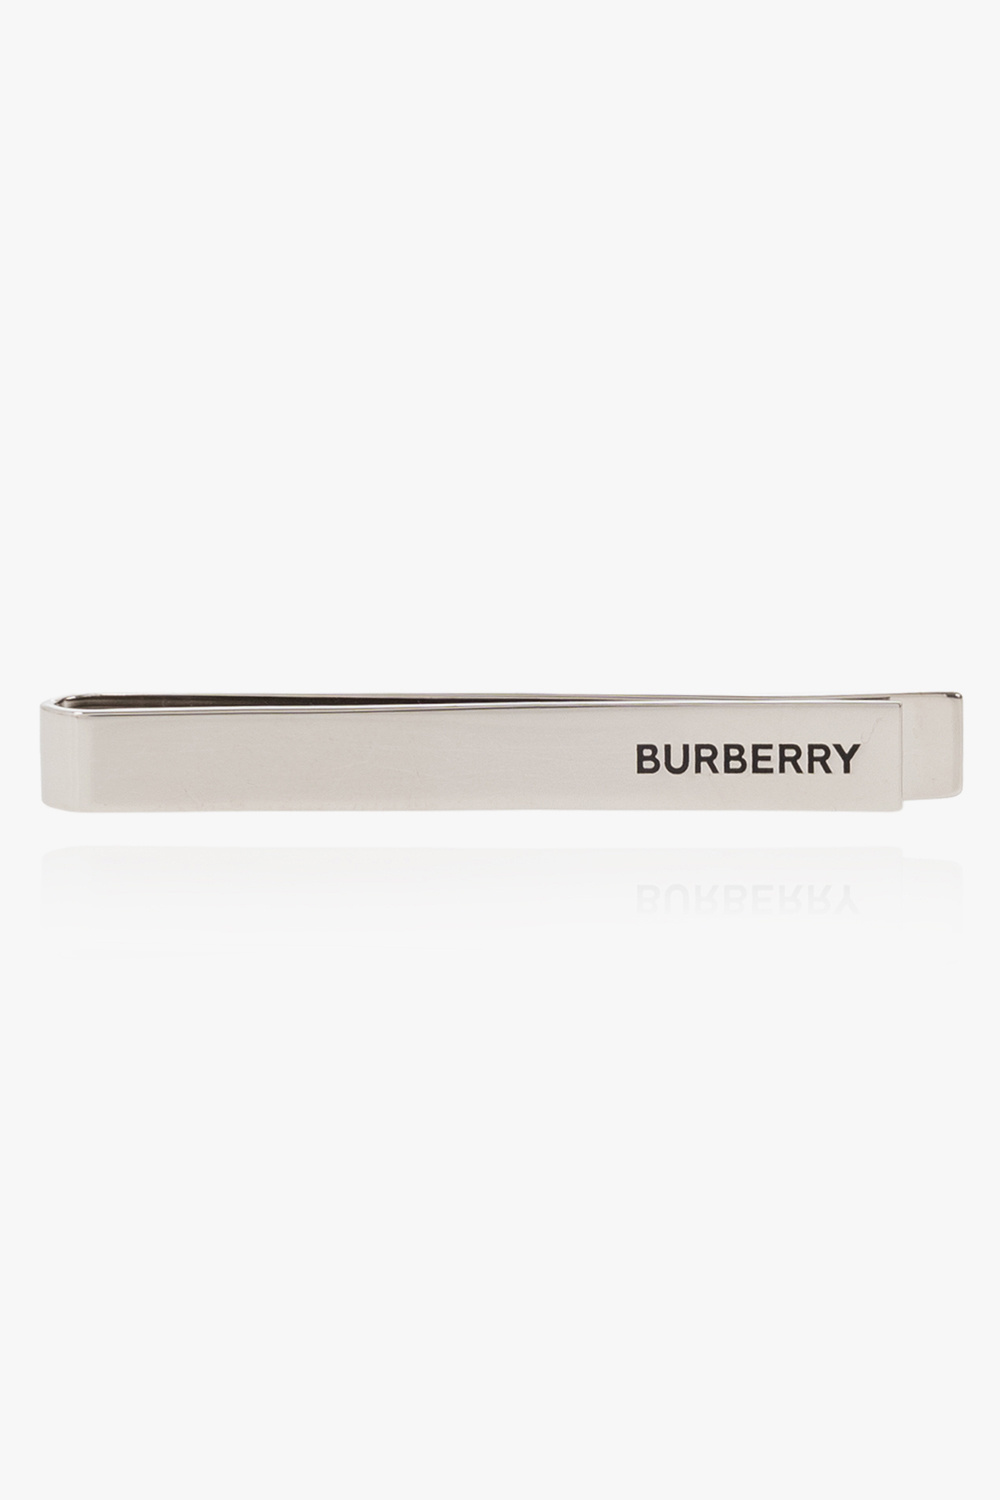 Burberry check-engraved Palladium-Plated Tie Bar - Silver